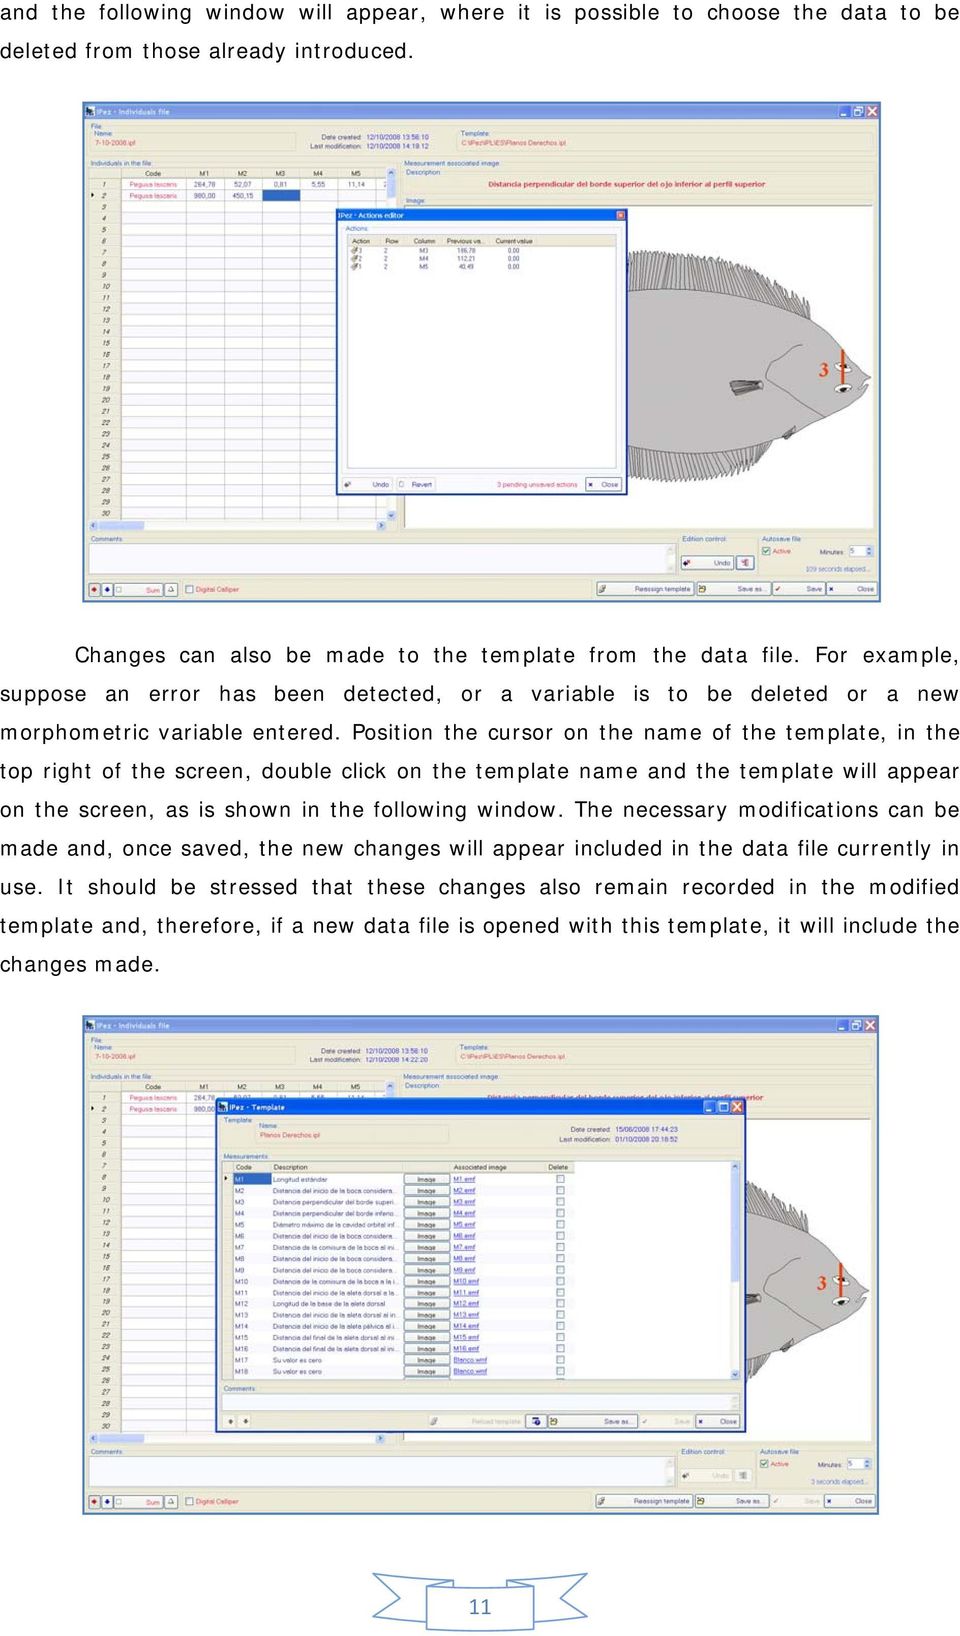 Position the cursor on the name of the template, in the top right of the screen, double click on the template name and the template will appear on the screen, as is shown in the following window.